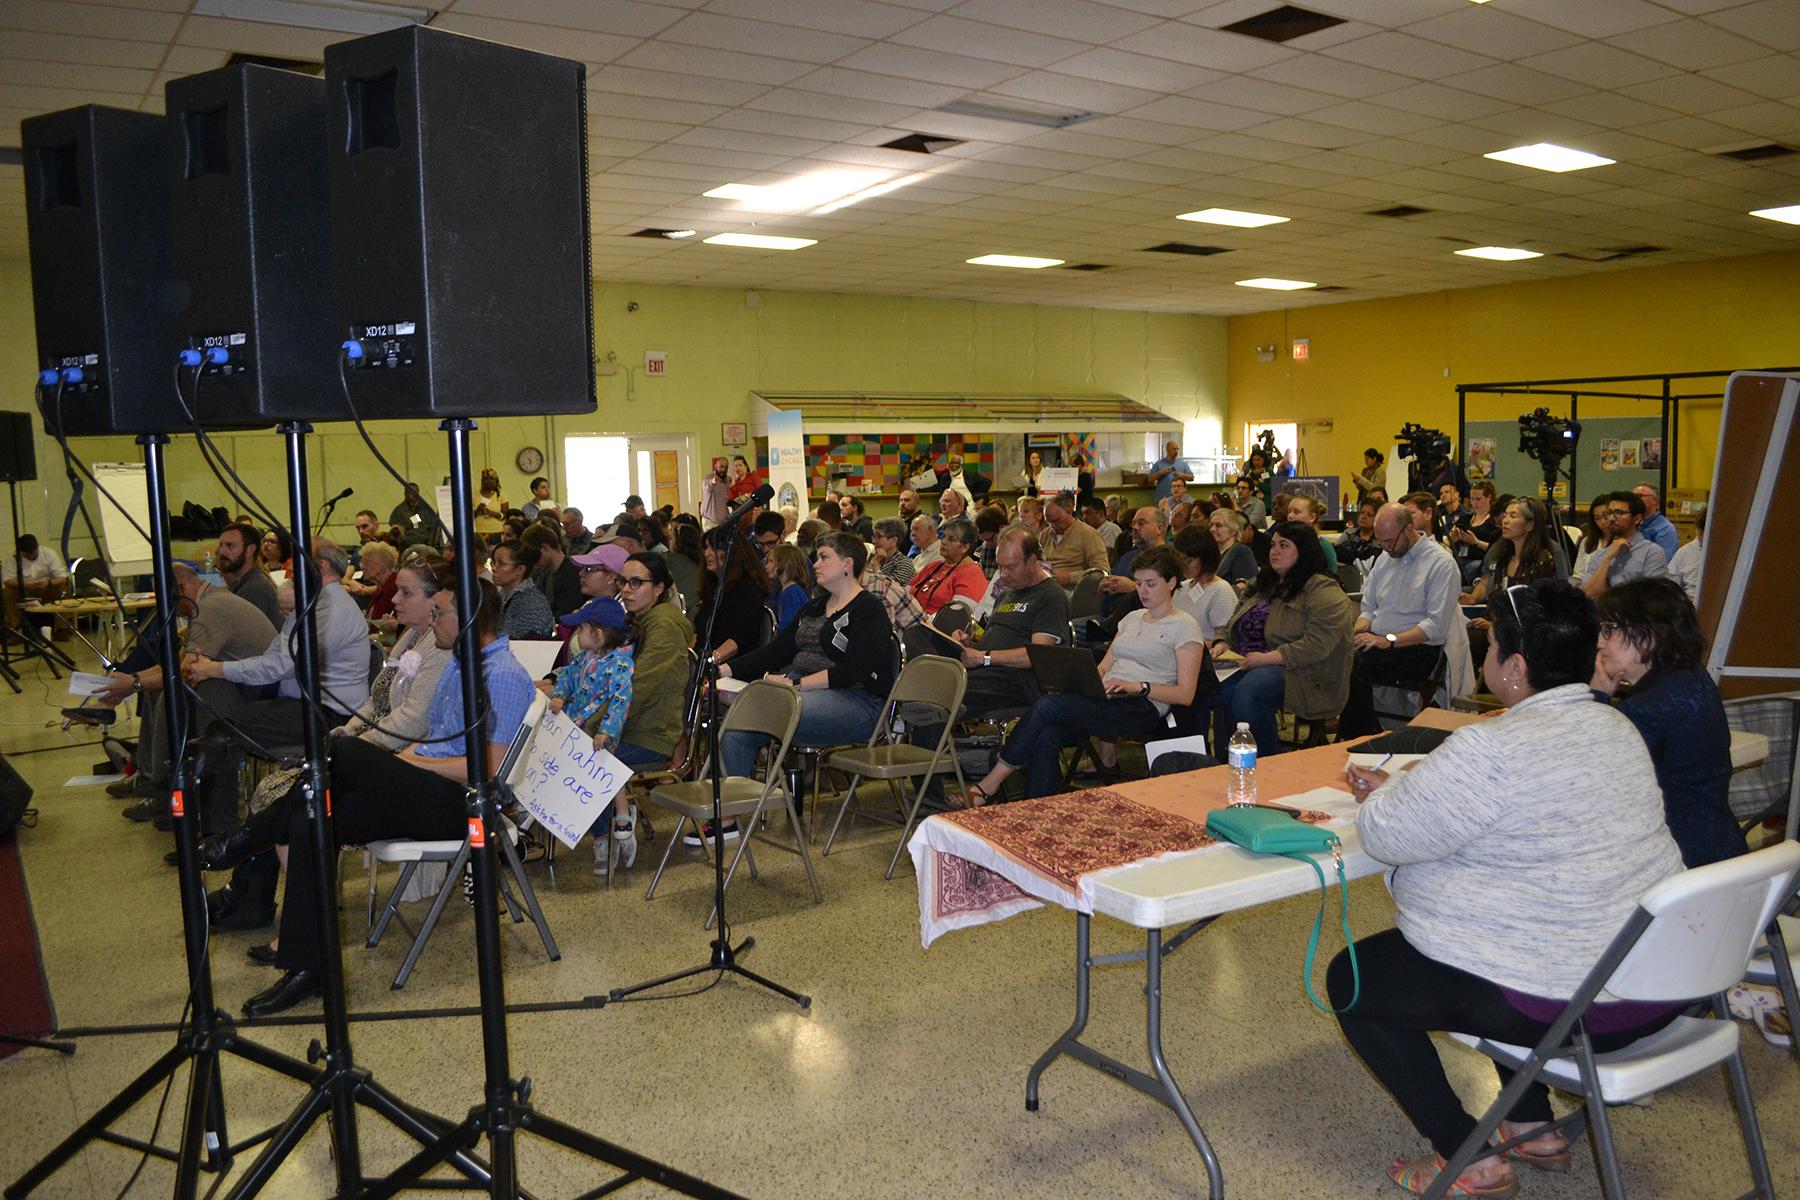  About 100 residents attended a public meeting Thursday to address manganese pollution on the Southeast Side. (Alex Ruppenthal / Chicago Tonight) 